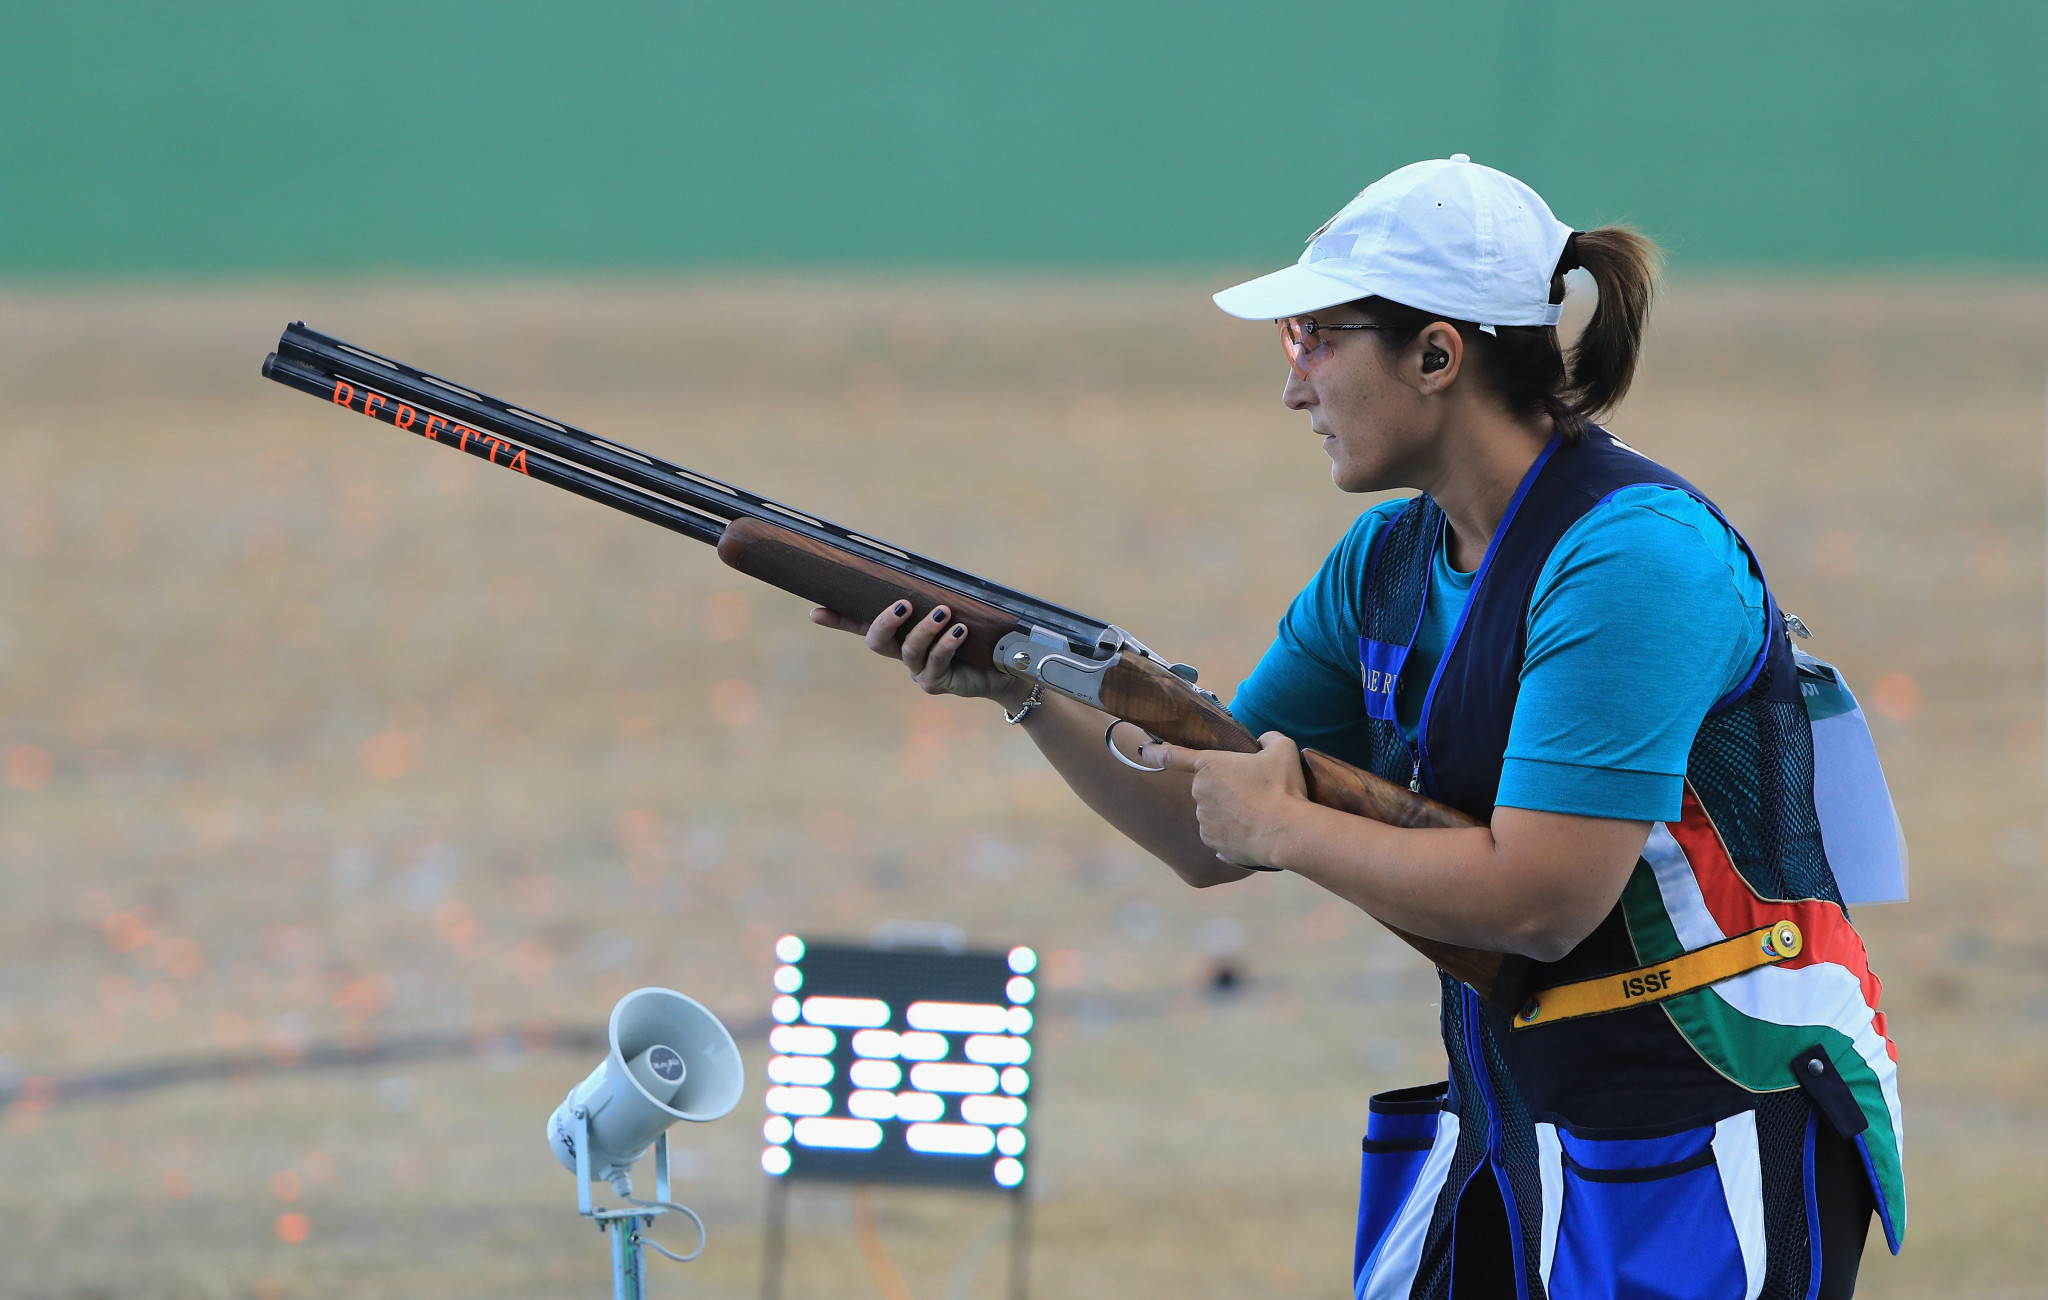 Cainero and Rossetti win skeet titles at European Shooting Championships in Osijek